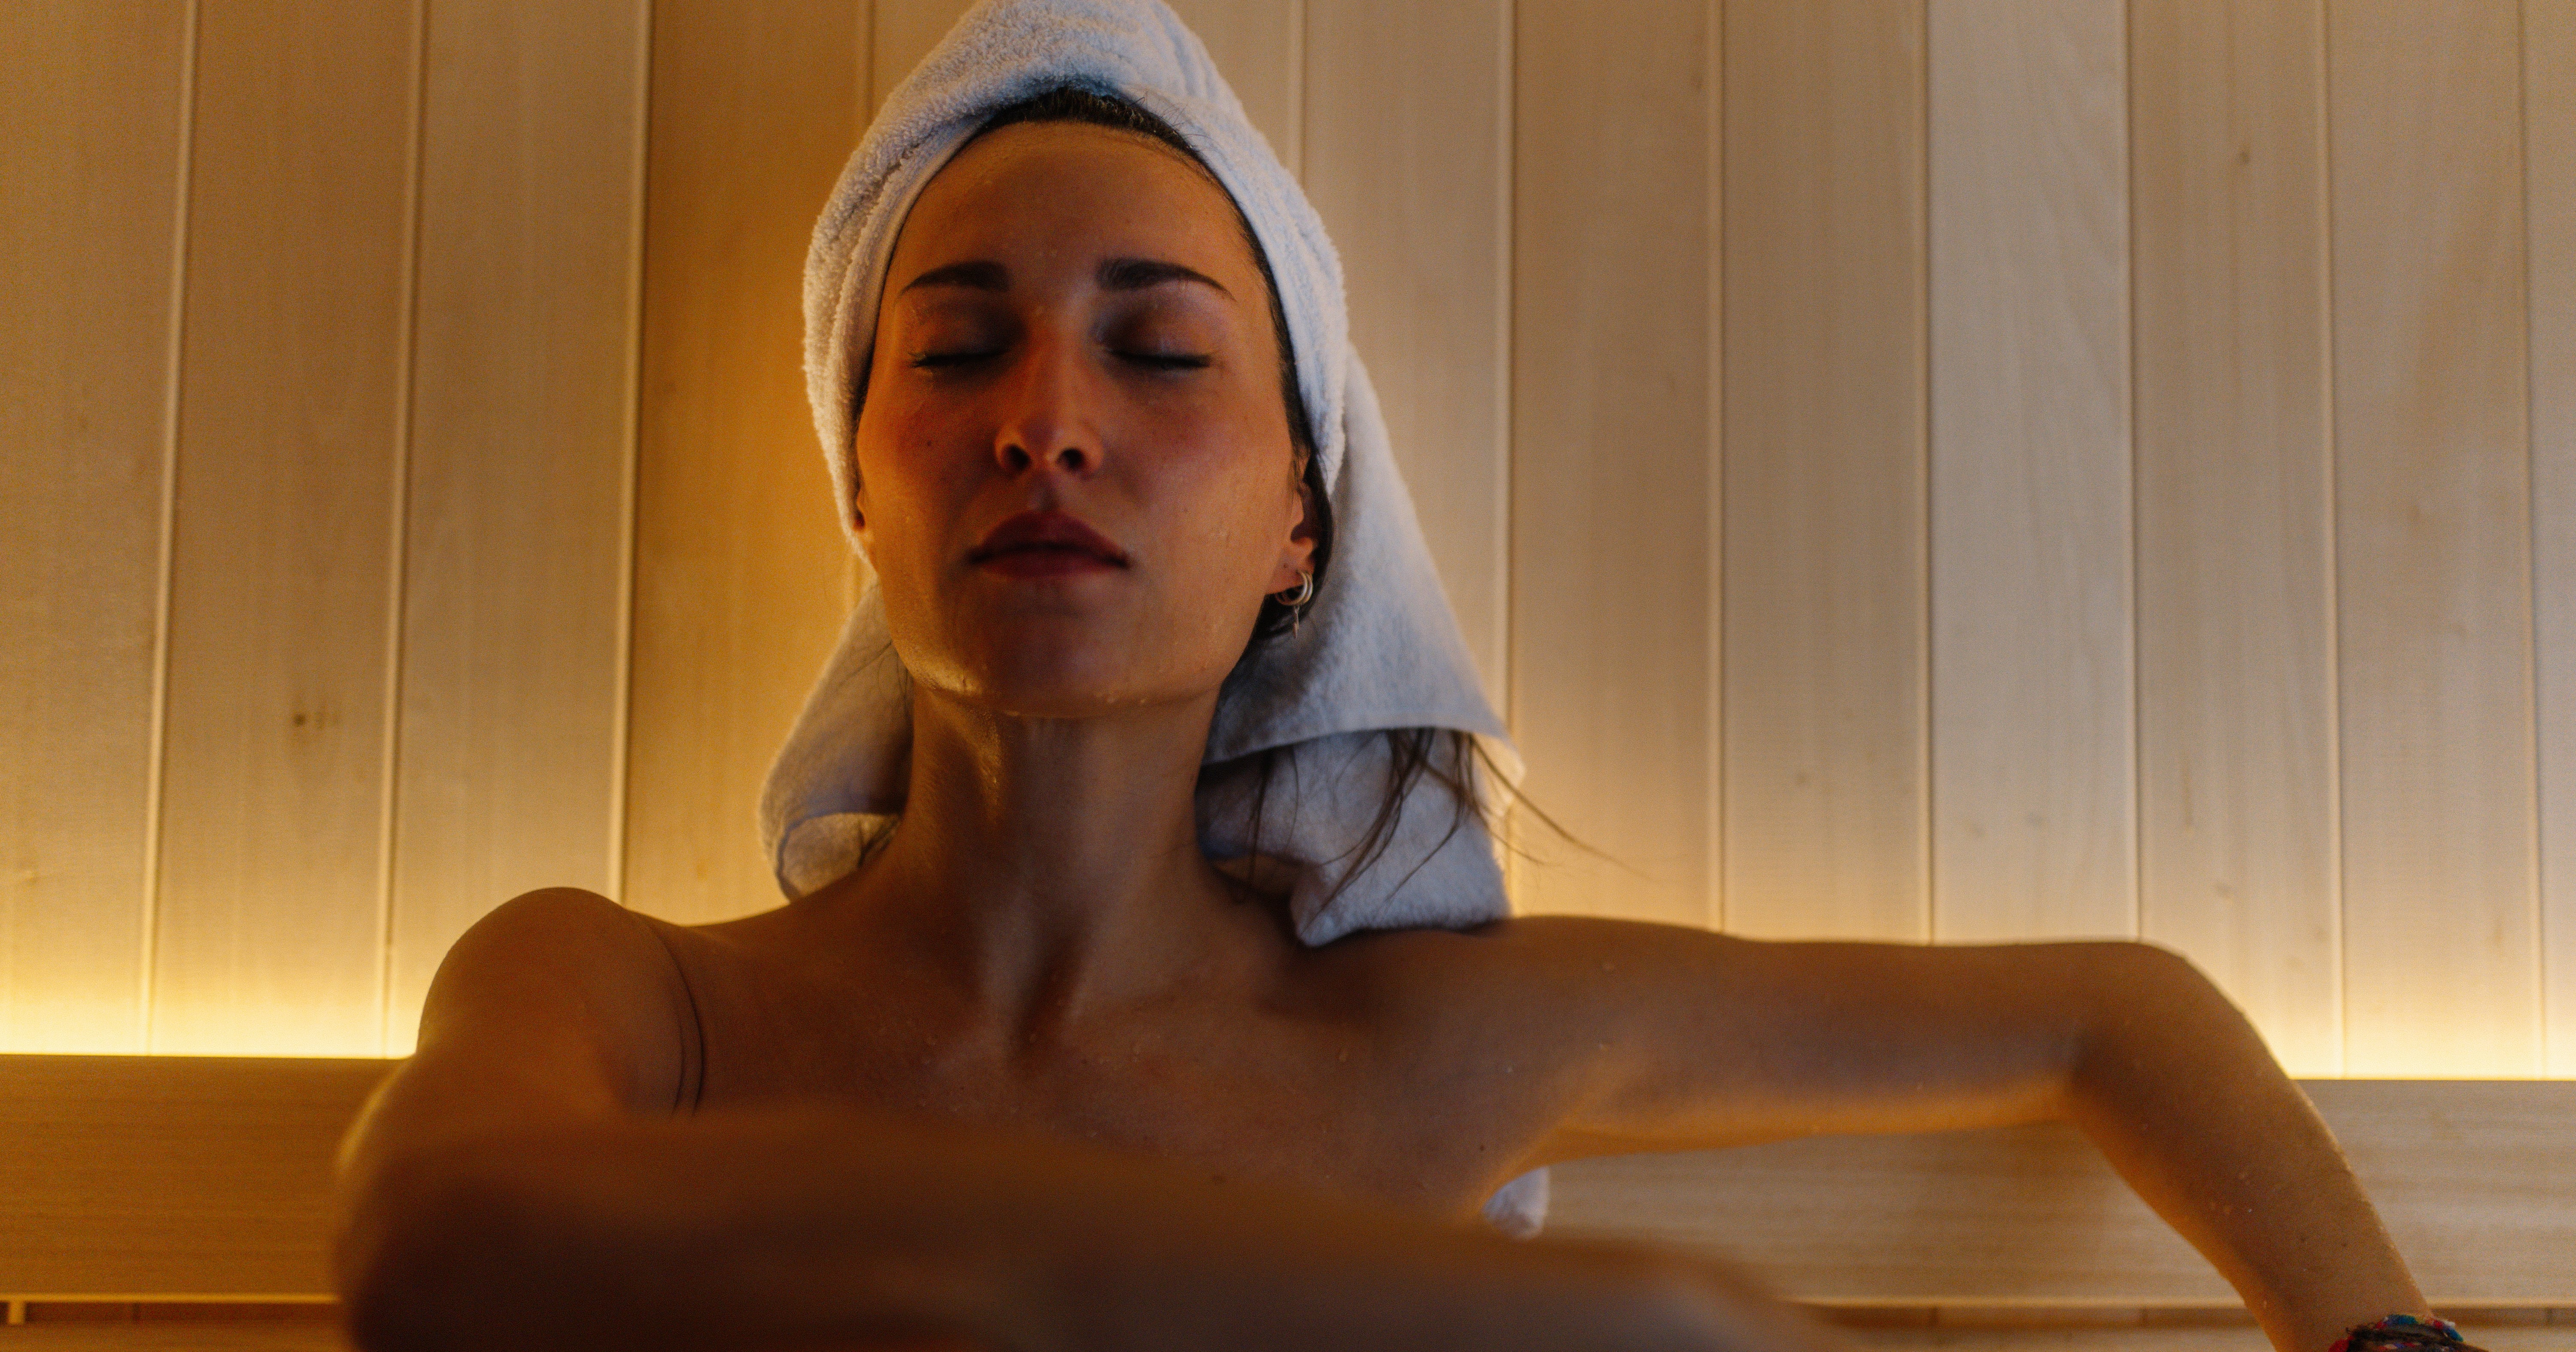 Can You Use a Sauna With Rosacea or Other Conditions?